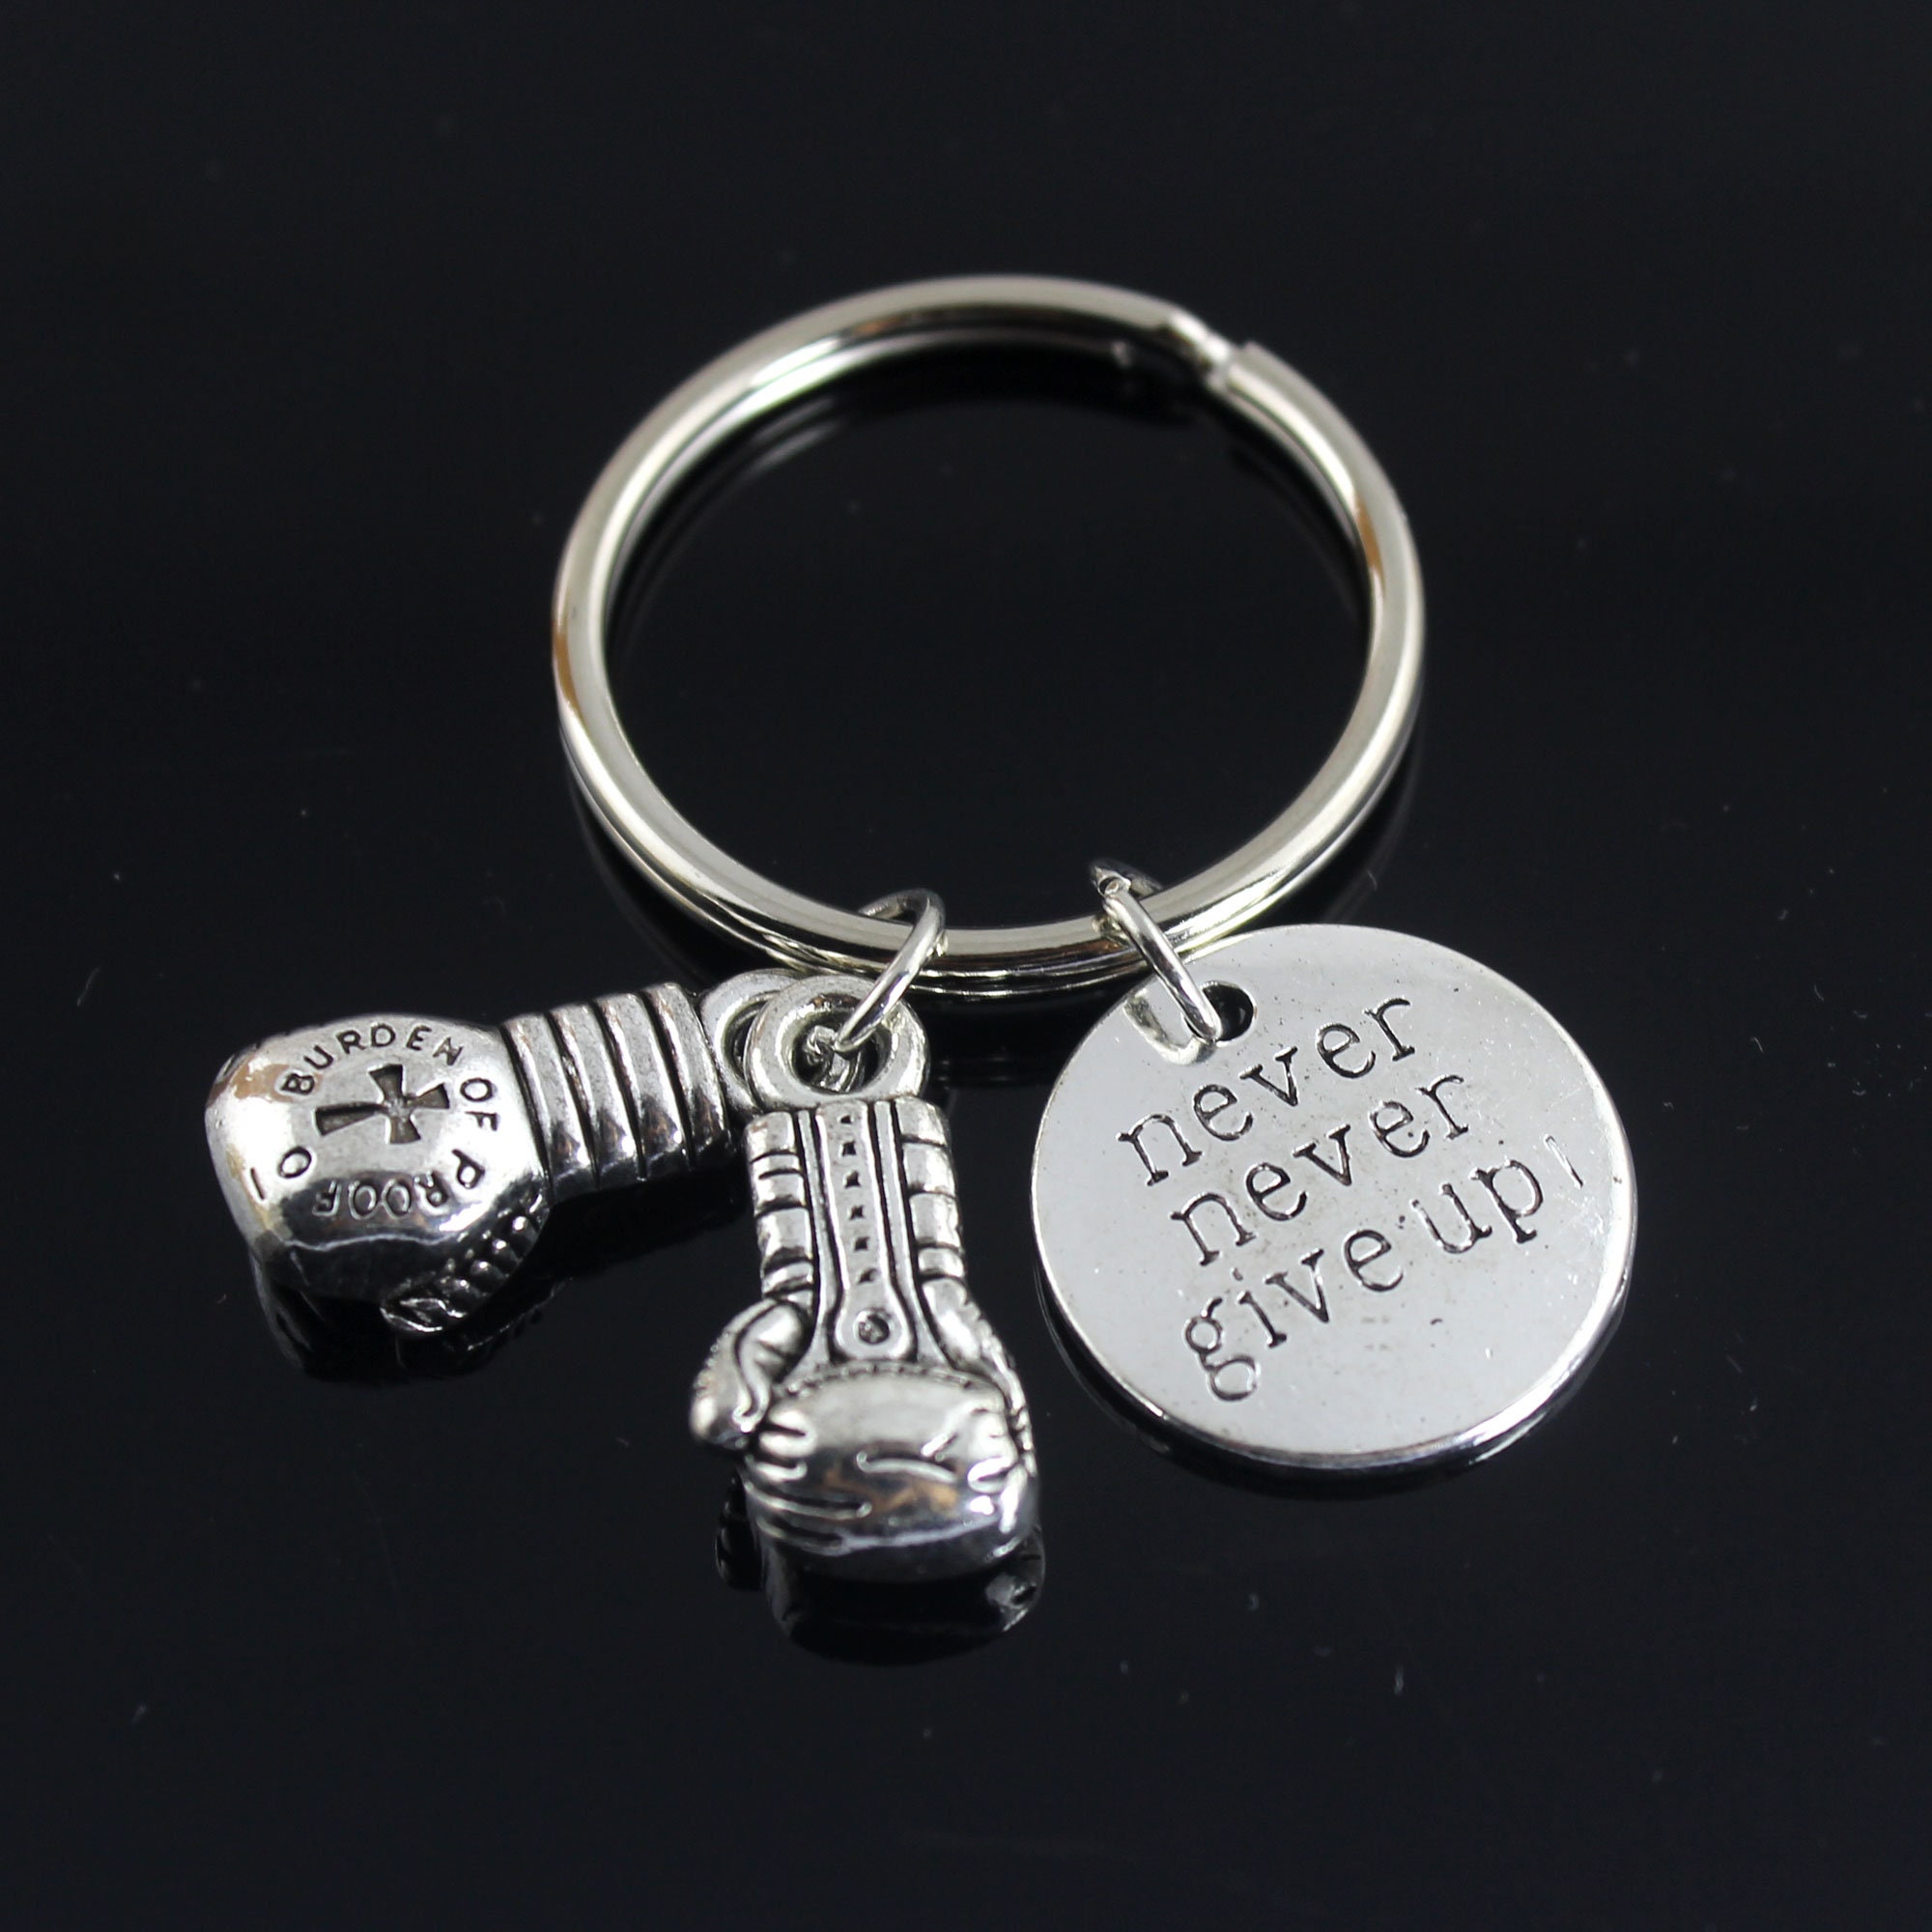 Never Give Up Keychain, Graduation Keychain, Progress Keyring, Boxing Gloves Keychain, Boxing Mitts Gym Gifts, Boy Friend Gift, Key Ring